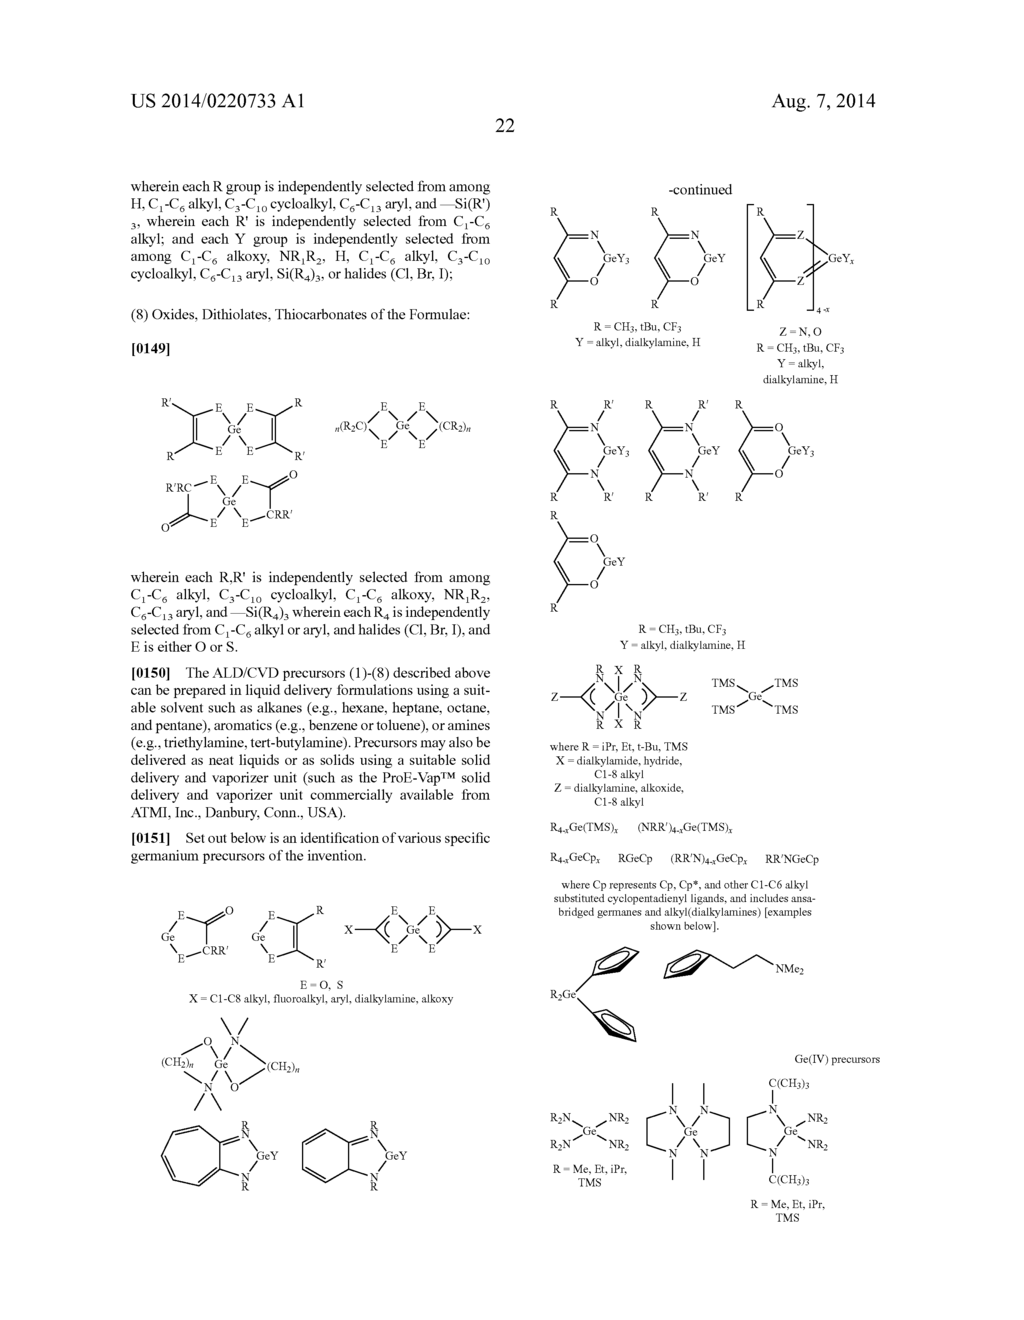 ANTIMONY AND GERMANIUM COMPLEXES USEFUL FOR CVD/ALD OF METAL THIN FILMS - diagram, schematic, and image 28